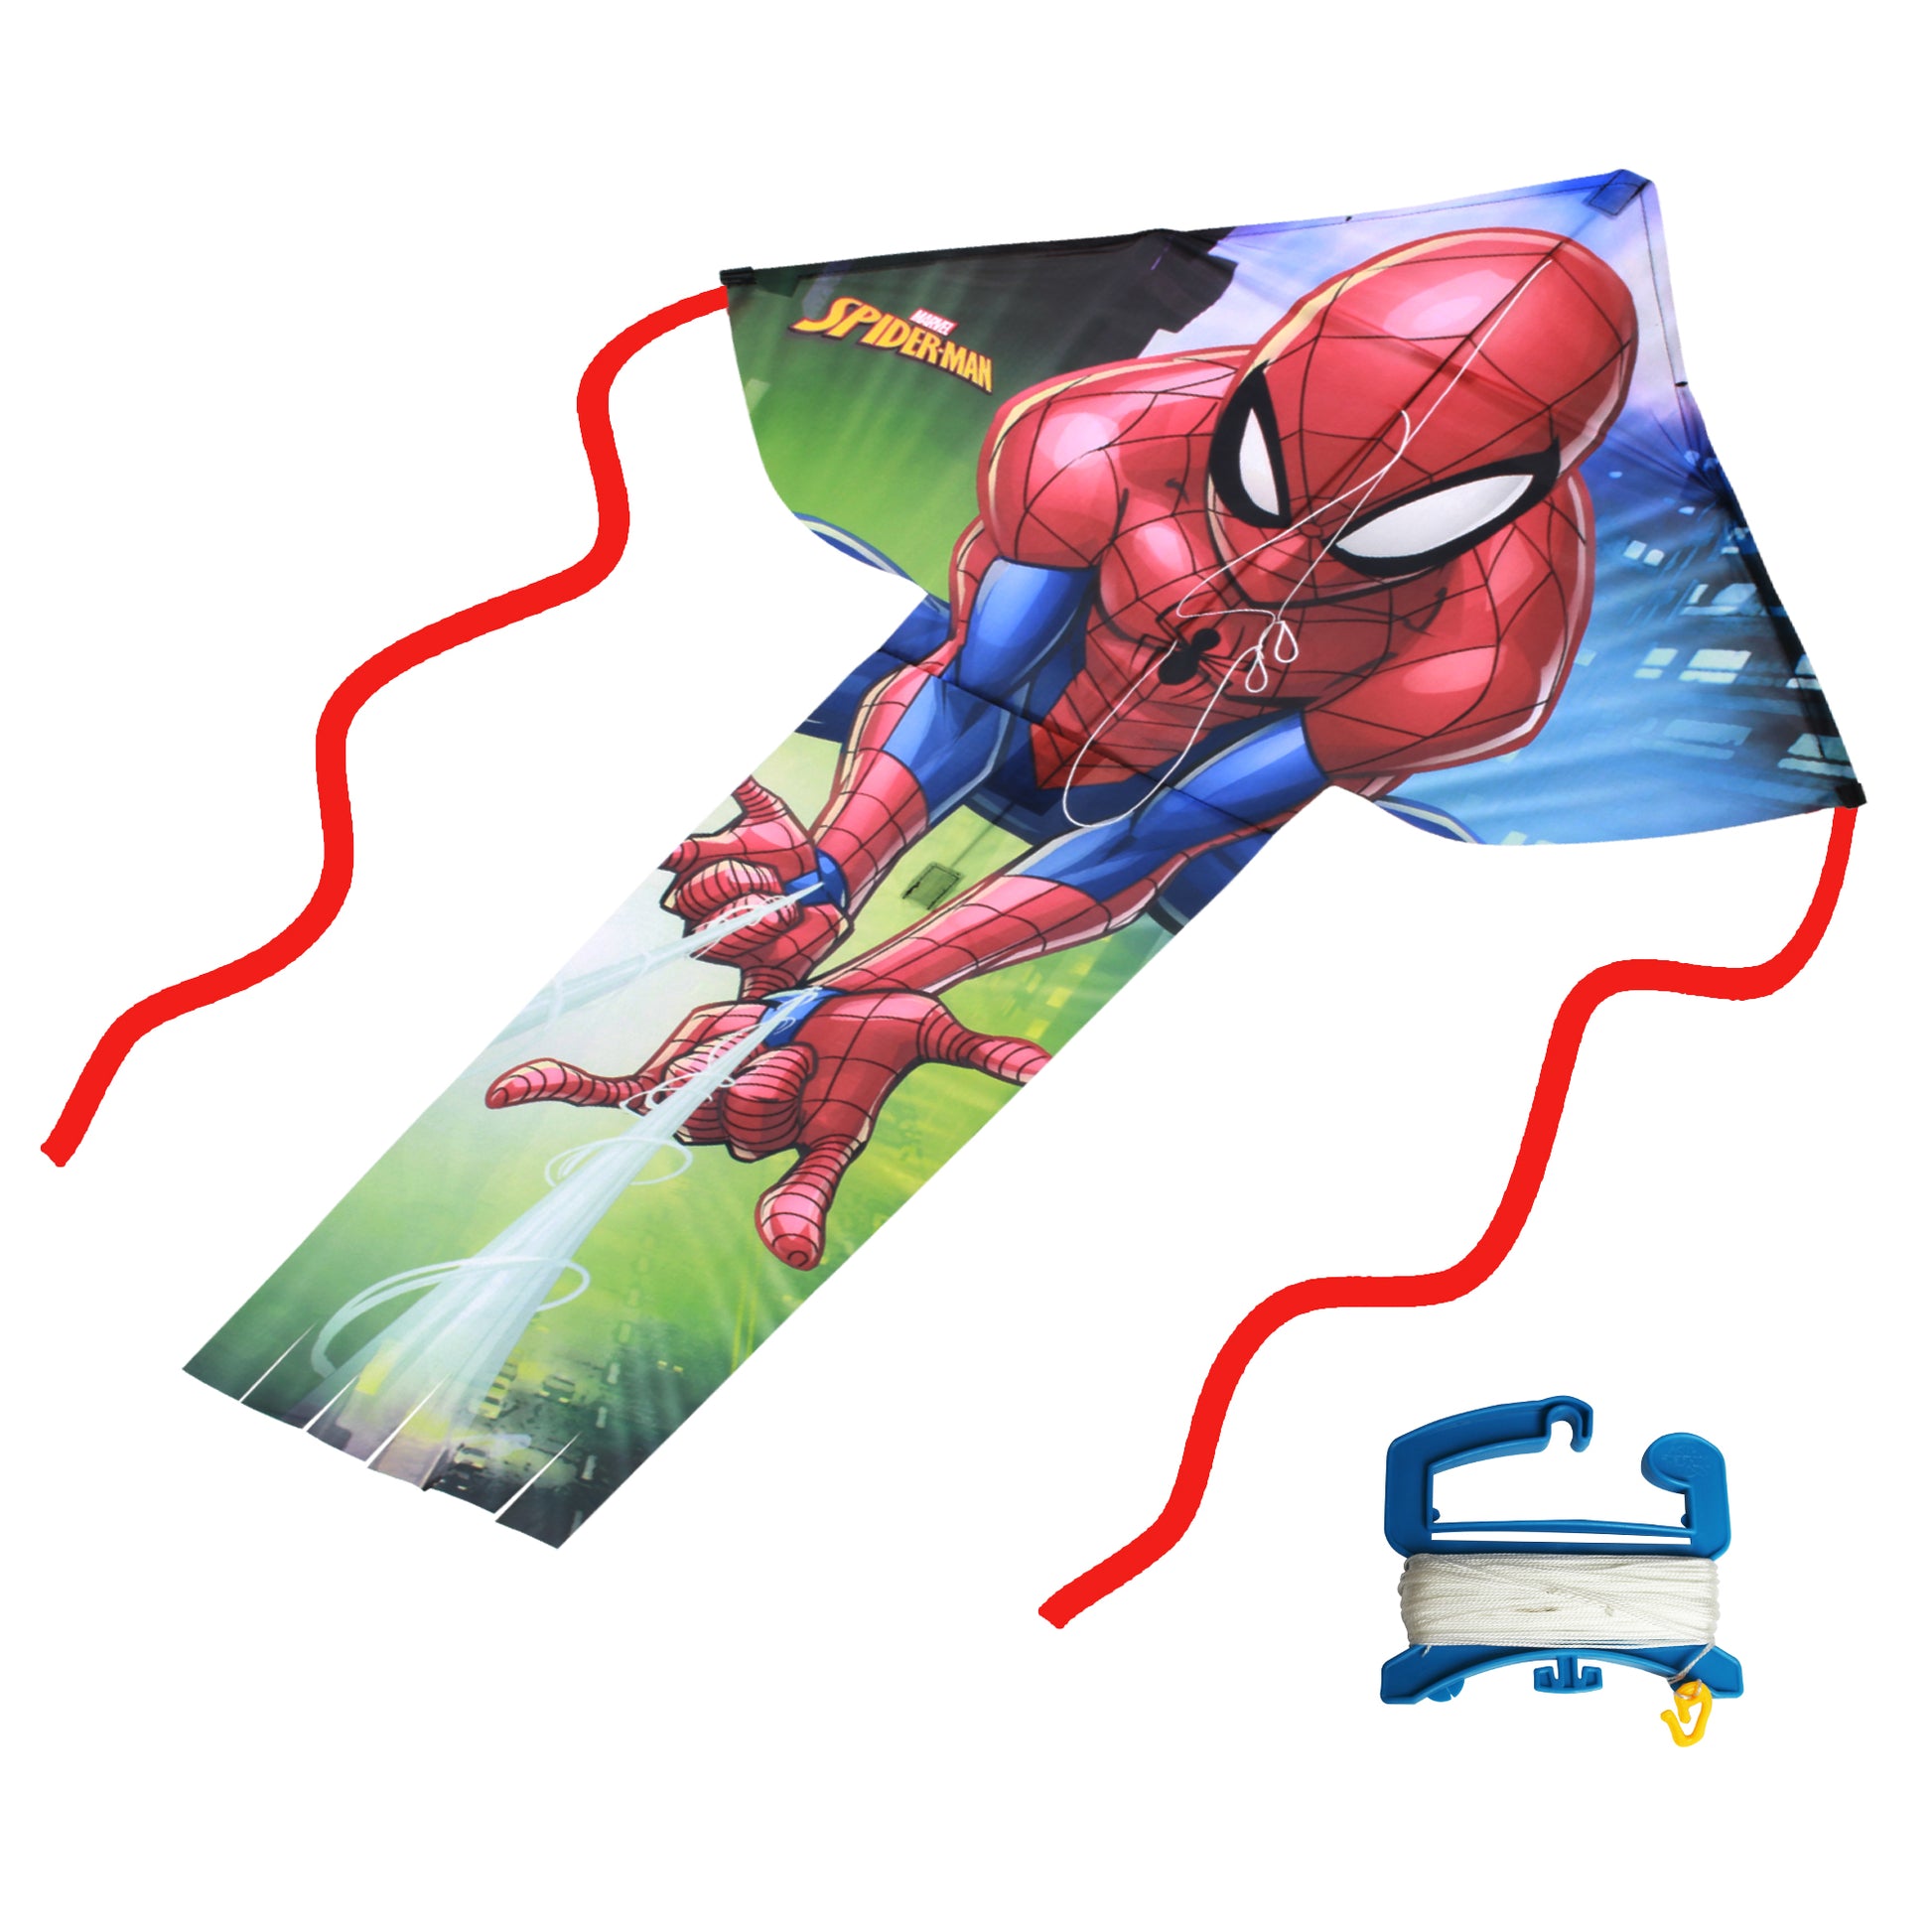 X Kites SkyFlier Delta Spider-Man product photo with handle